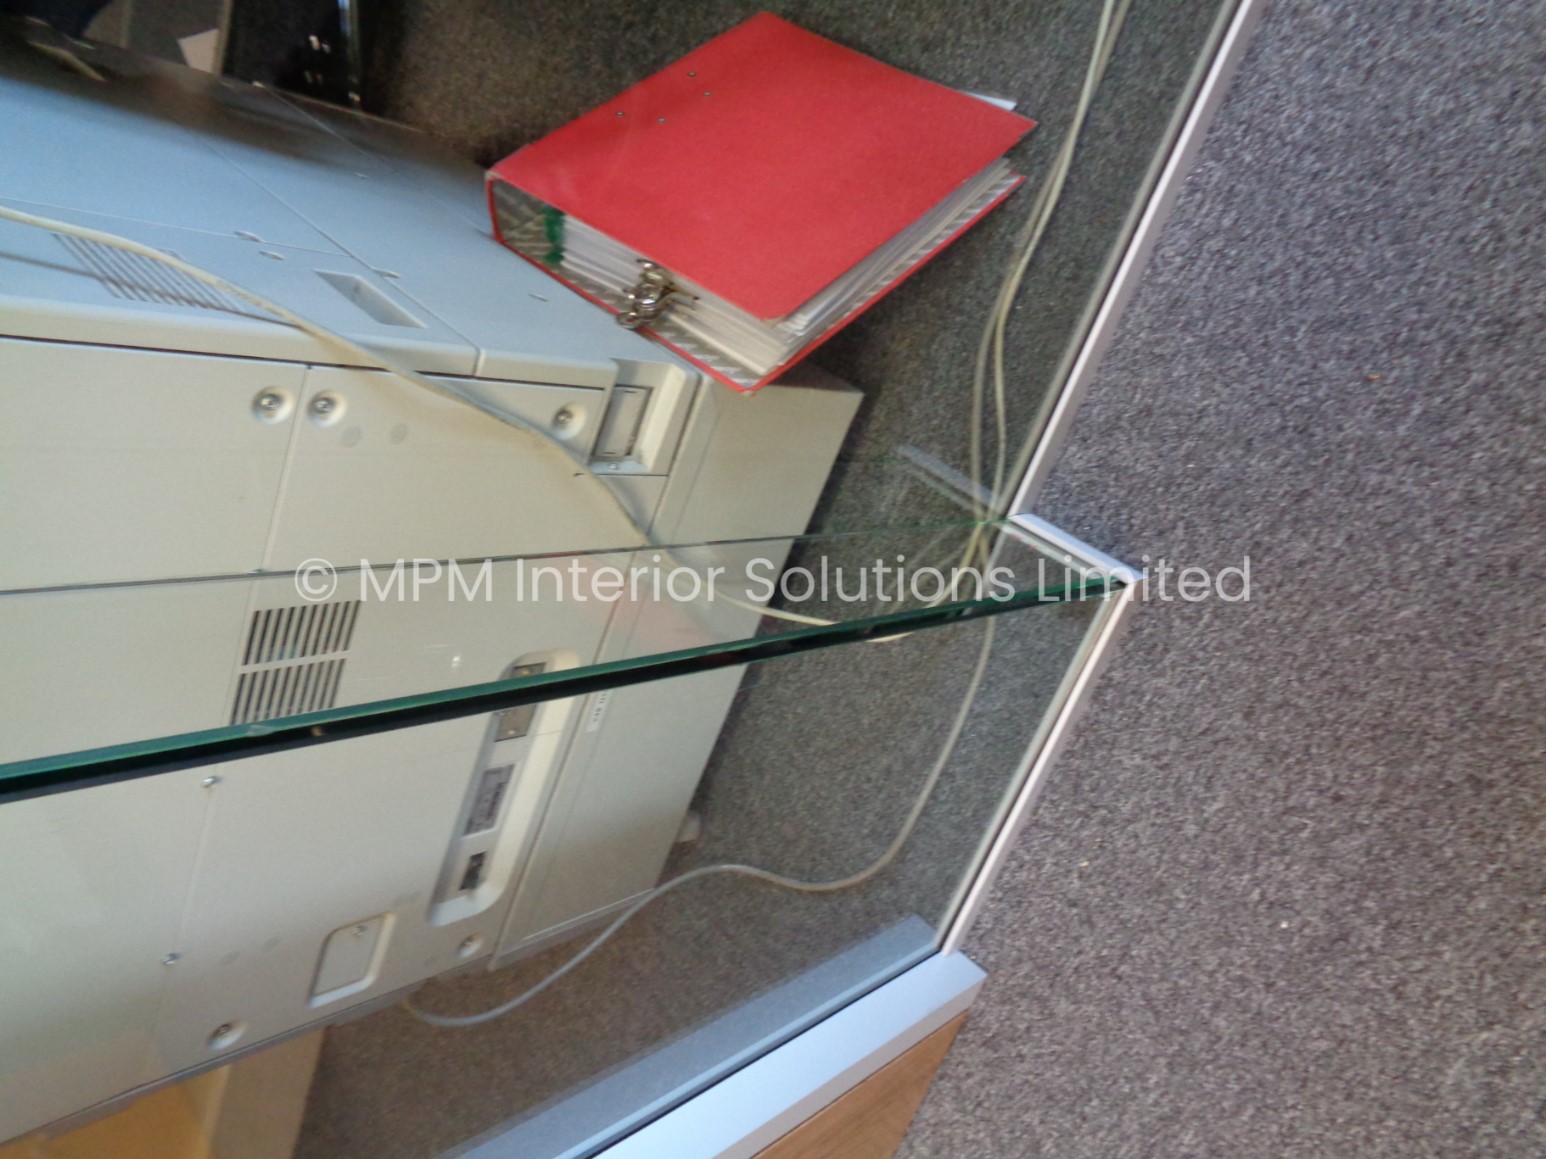 Frameless Glass Office Partitioning, Survery Roofing Group Ltd (Whyteleafe, Surrey), MPM Interior Solutions Limited